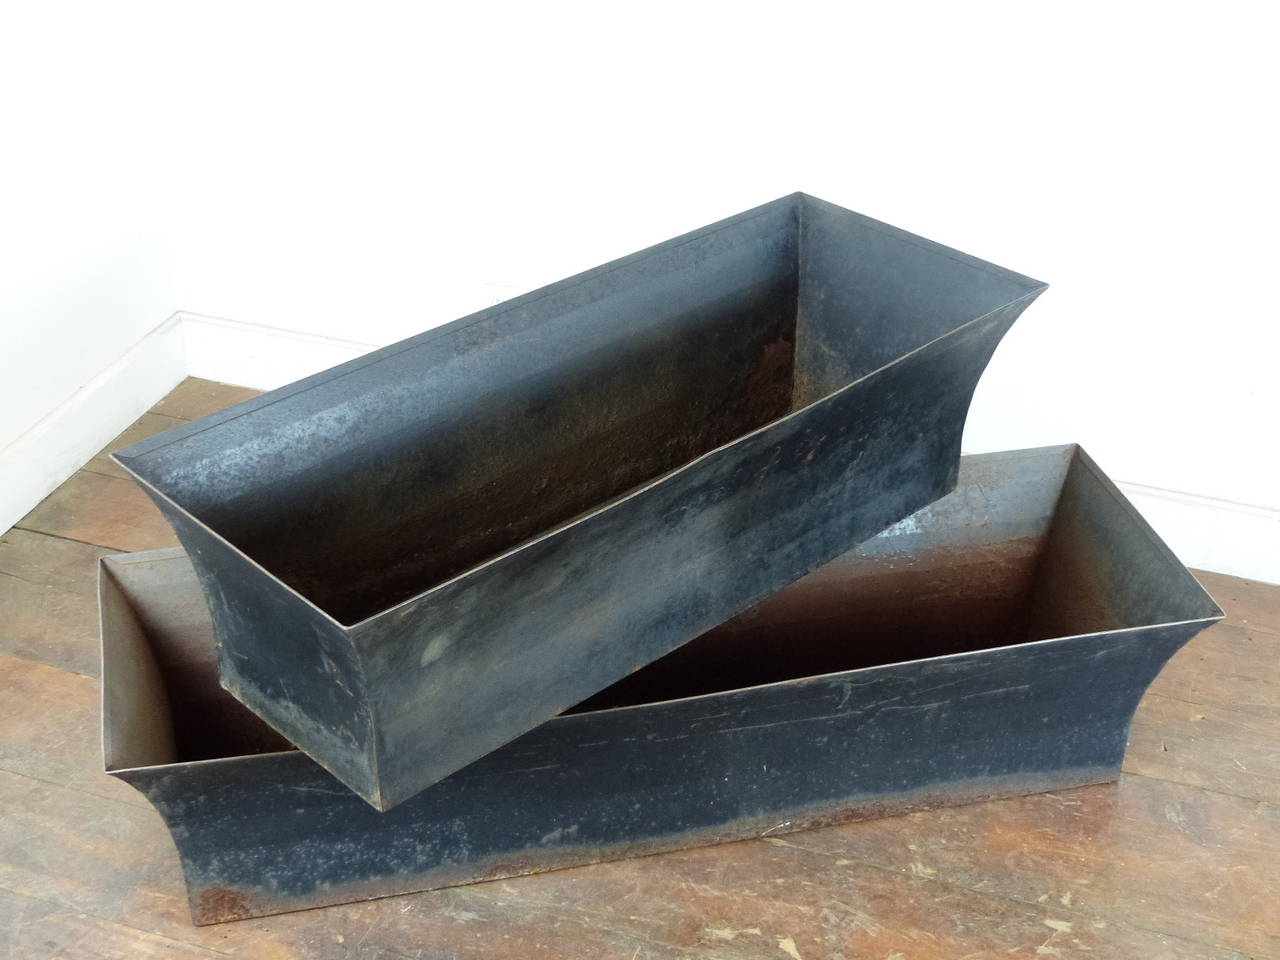 Heavy metal French planters , circa 1930 in heavy gauge steel with great original patina